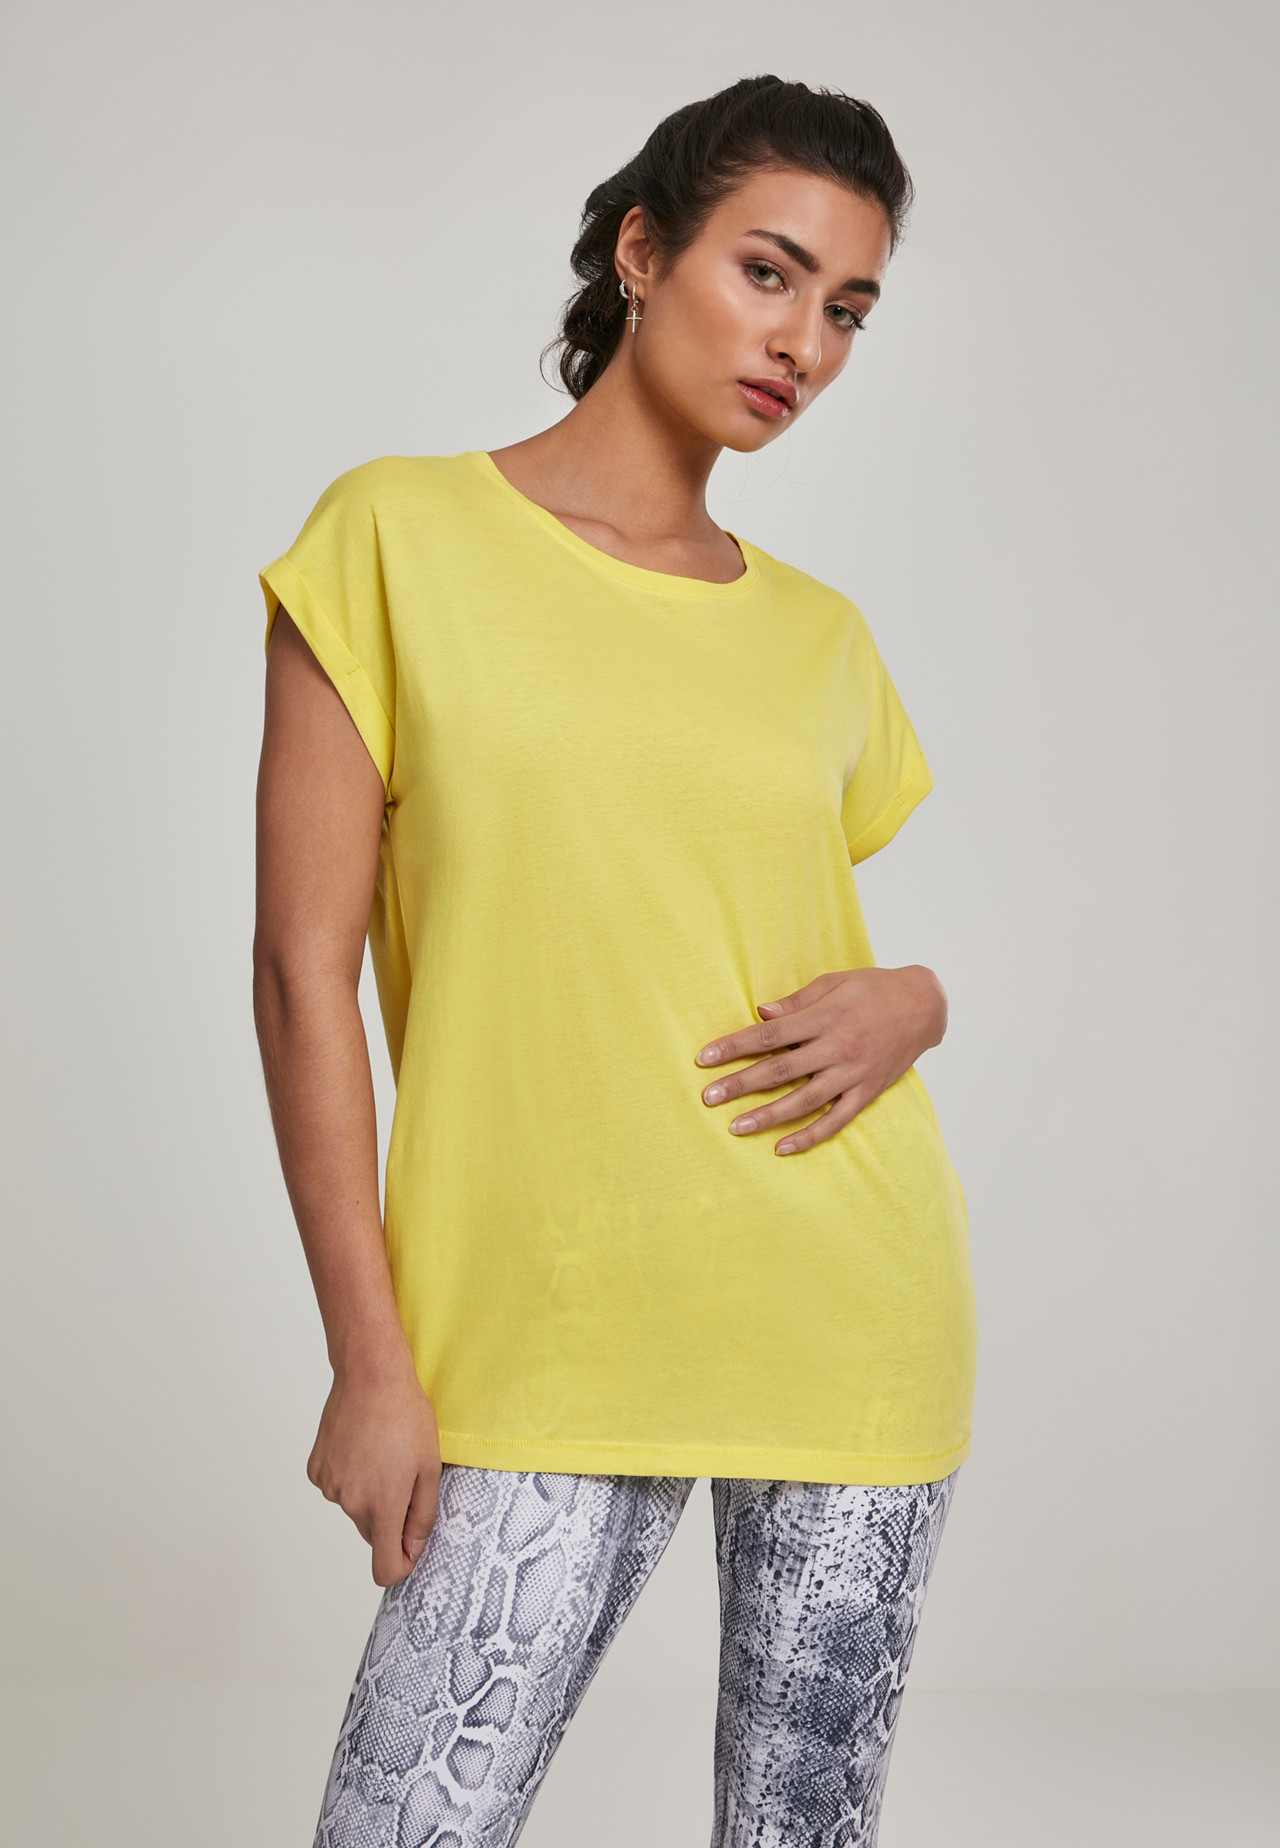 Urban Classics Ladies Extended Shoulder Tee (Bright Yellow, M)